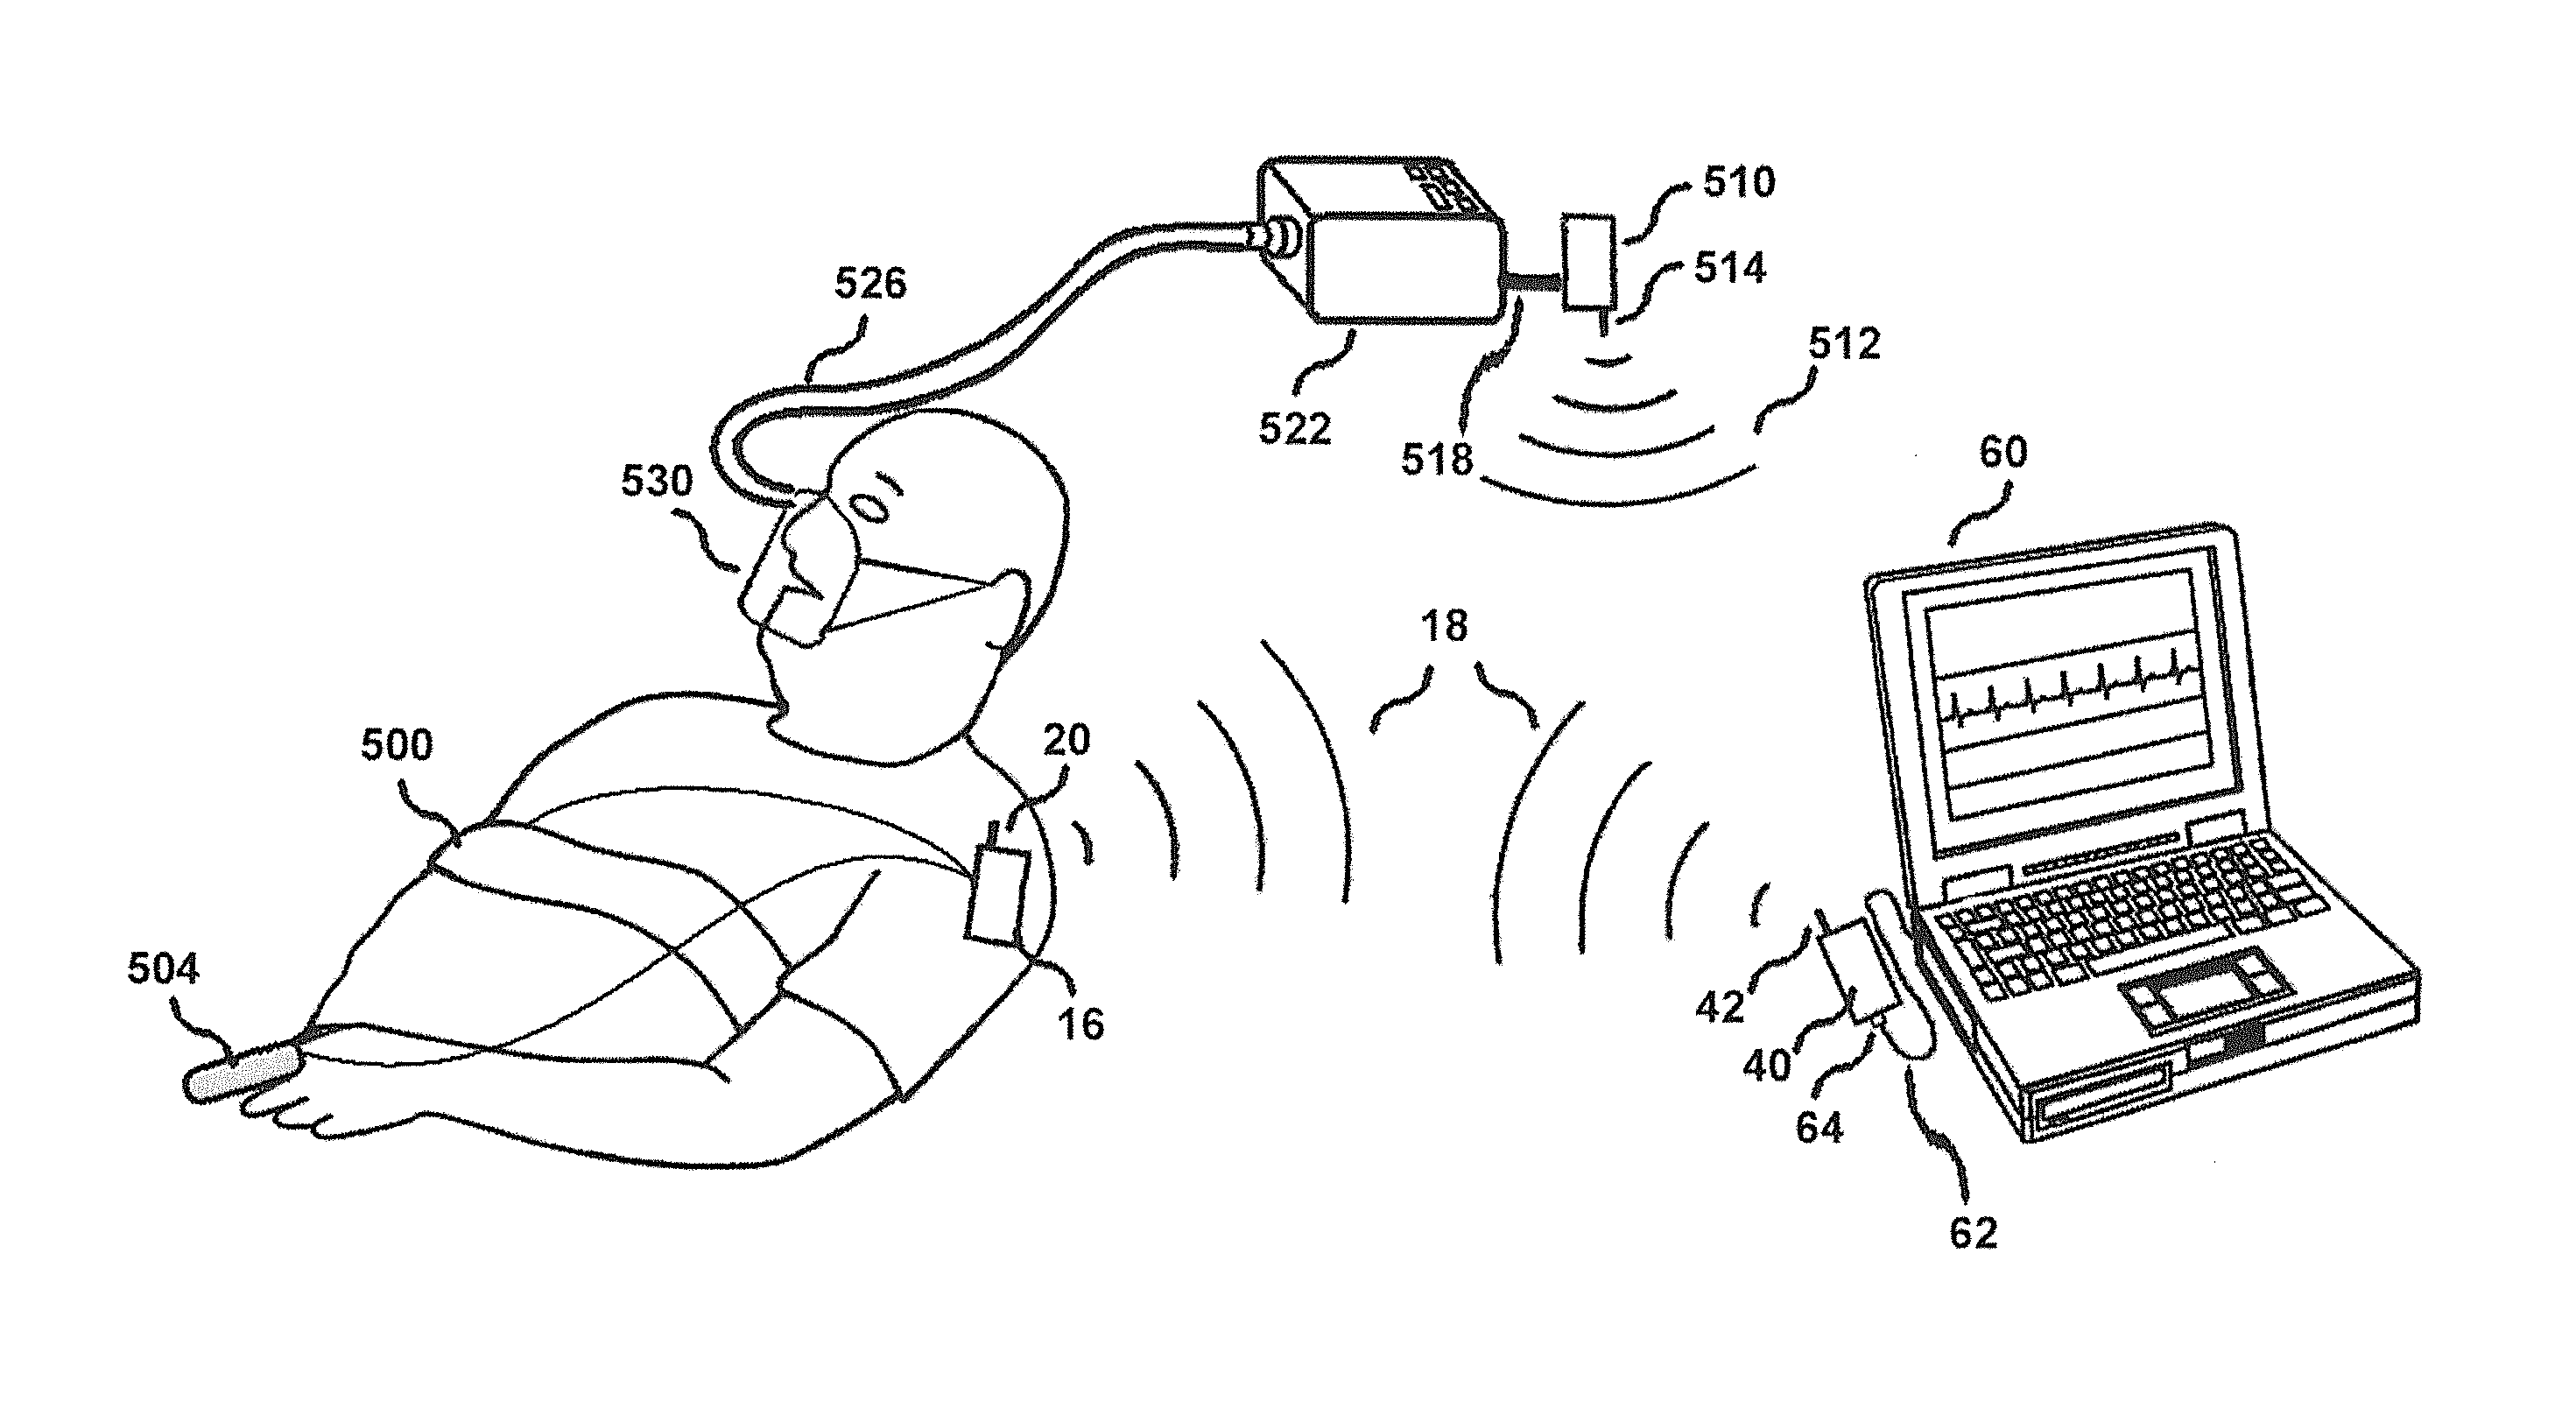 Integrated diagnostic and therapeutic system and method for improving treatment of subject with complex and central sleep apnea